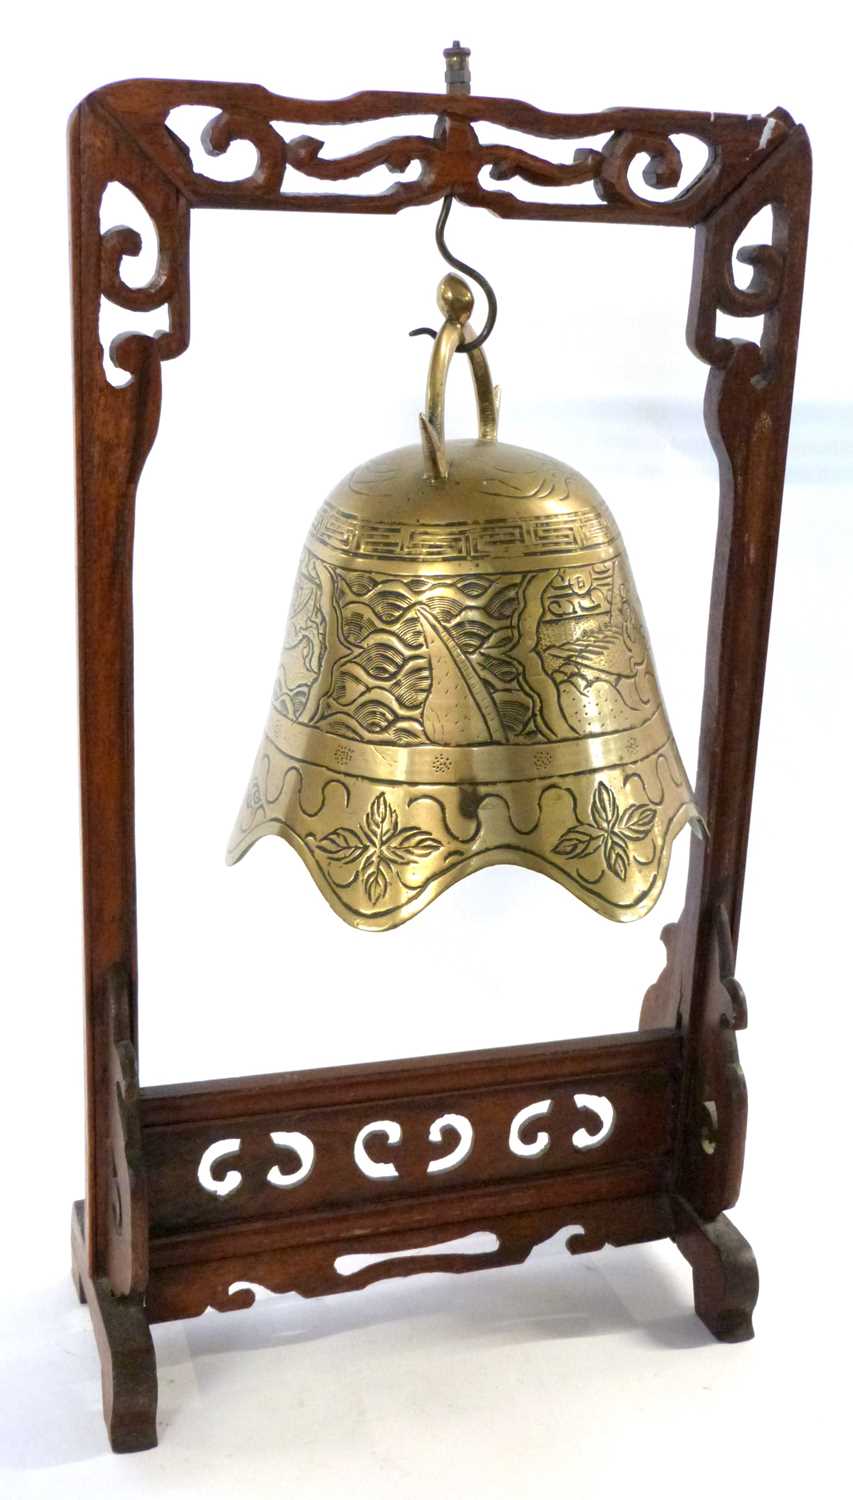 A Chinese Tibetan temple bell, engraved with dragons, with its carved hardwood stand - Image 2 of 3